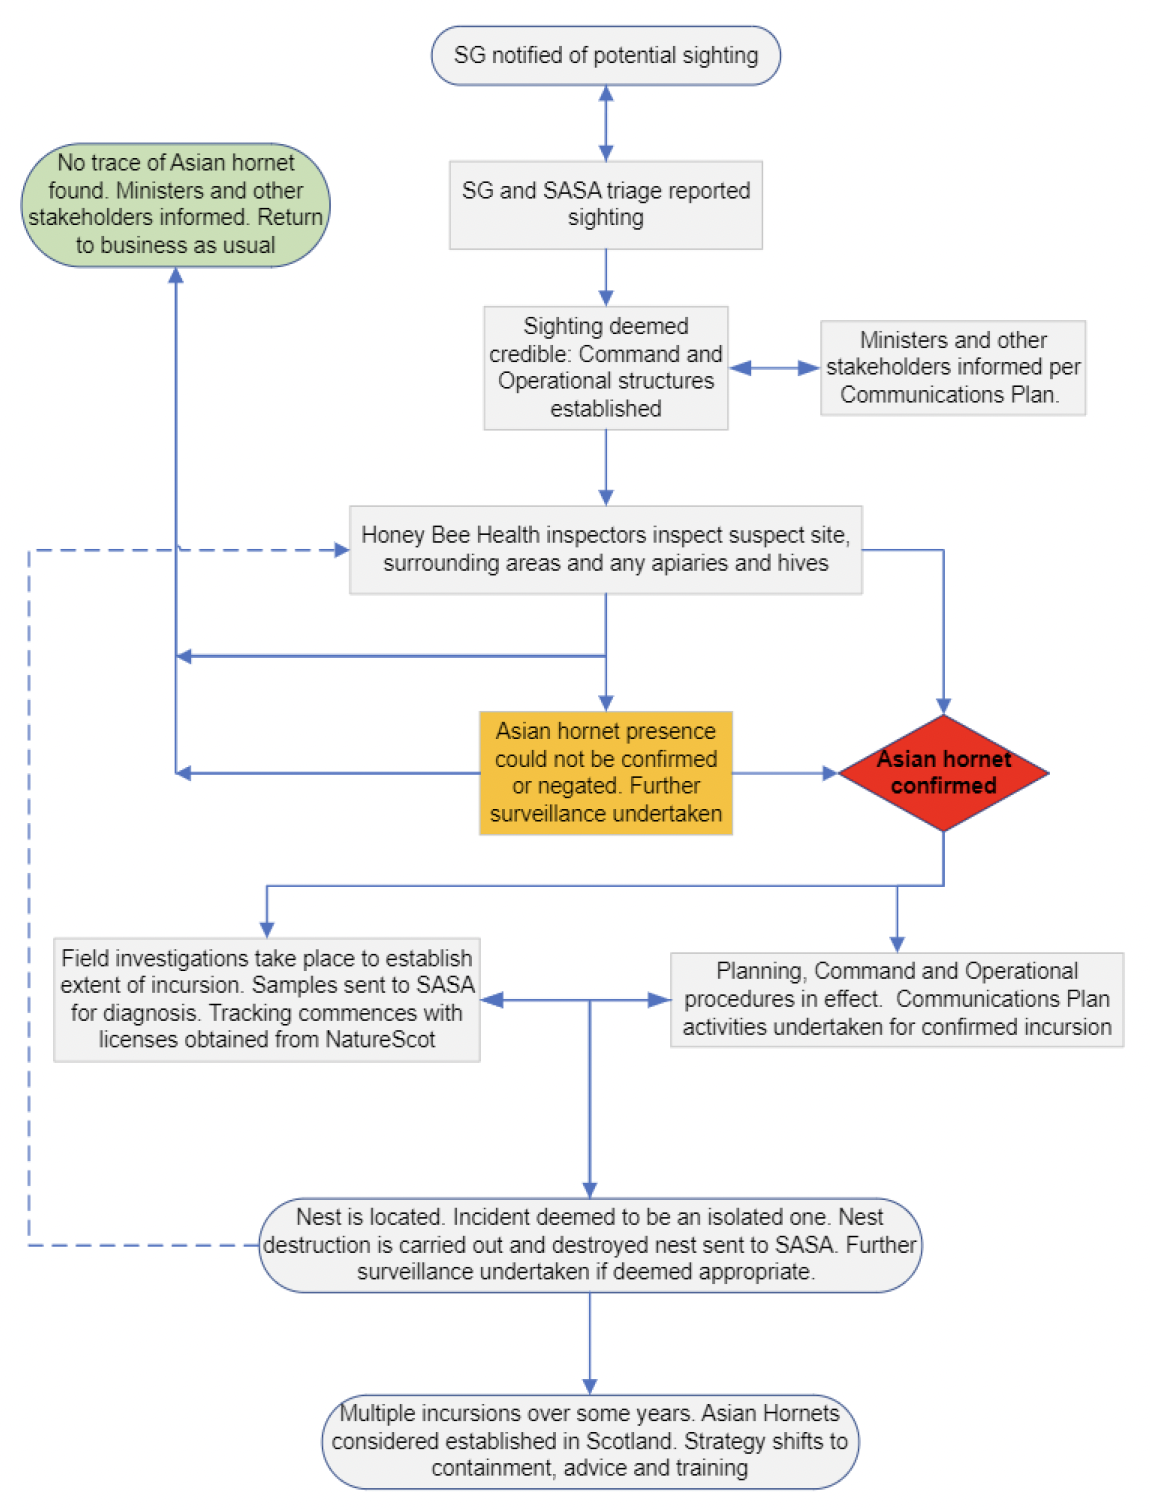 A flowchart of the process to be followed from initial report of a potential sighting of an Asian hornet to determining whether an Asian hornet presence can be confirmed or negated and the processes to be followed depending on each outcome